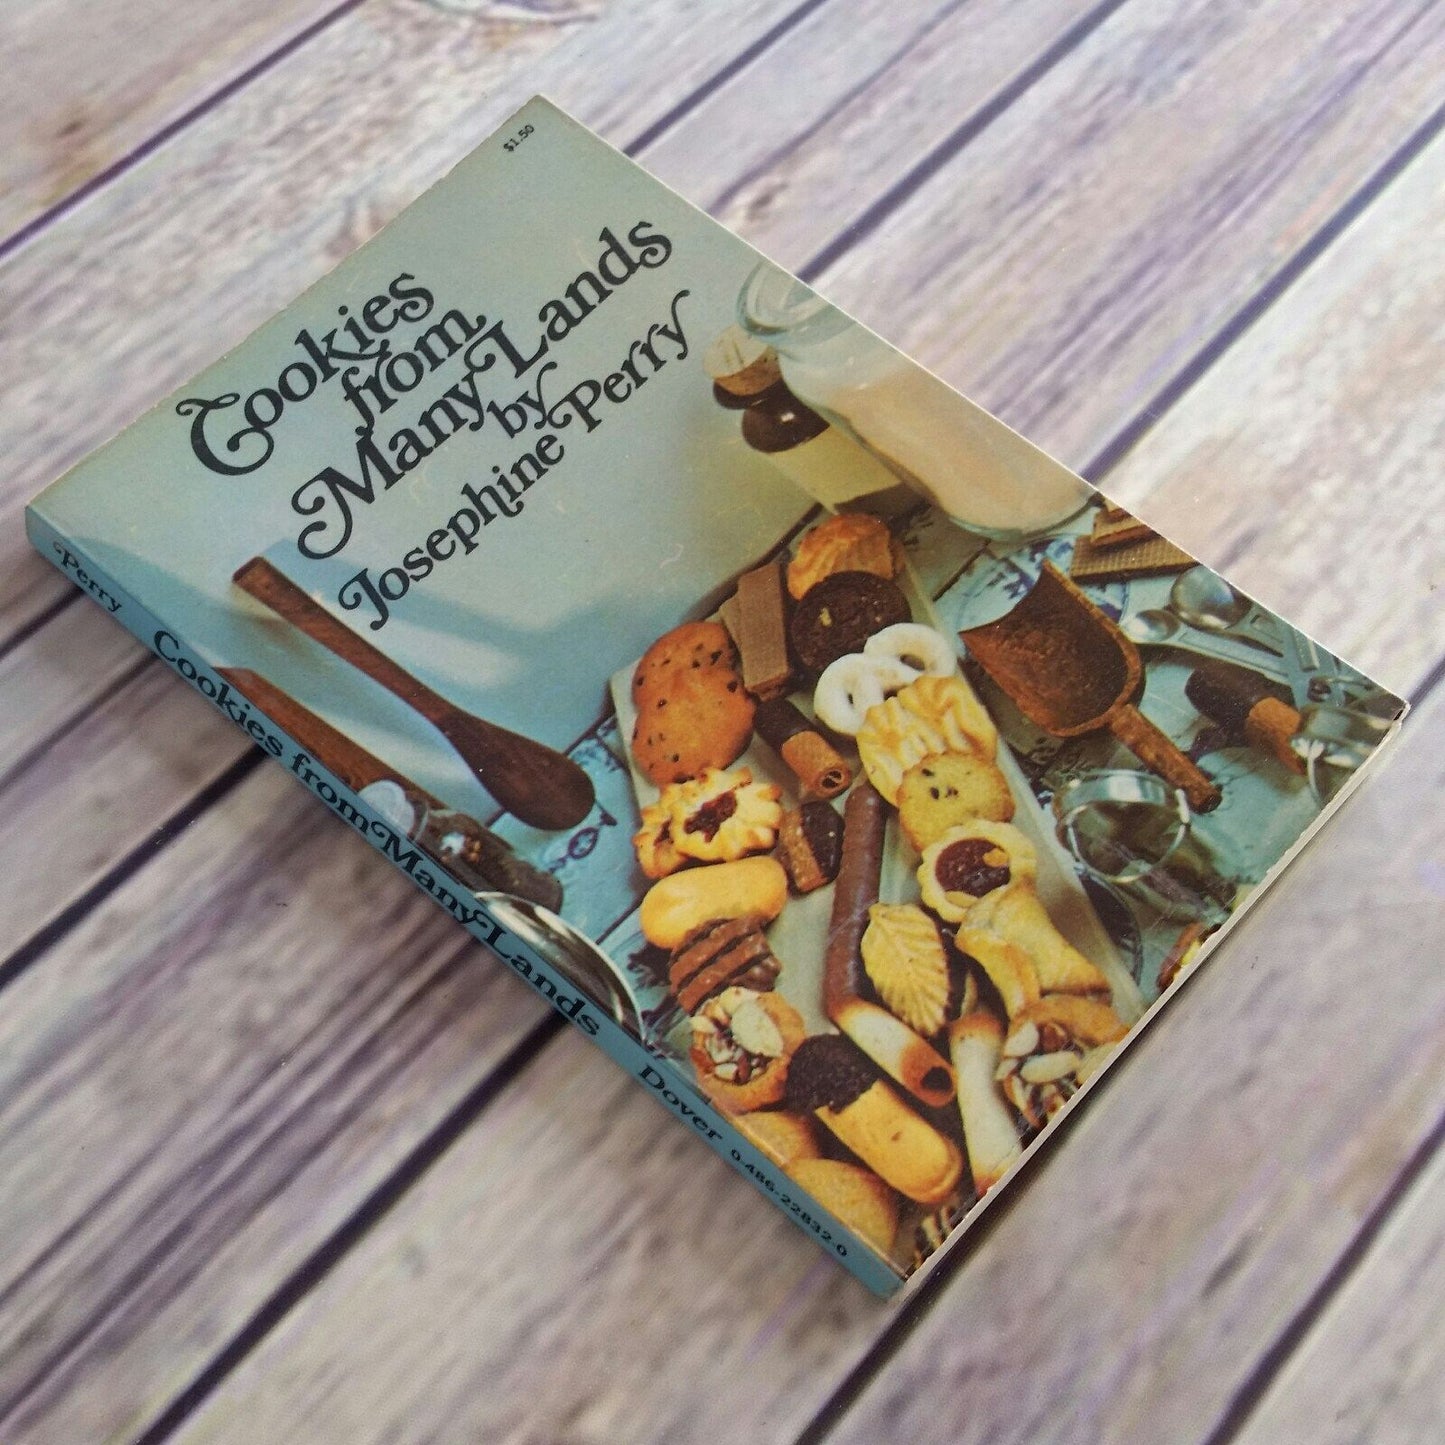 Vintage Cook Book Cookies from Many Lands 1972 Cookie Recipes Paperback Josephine Perry International Cookies